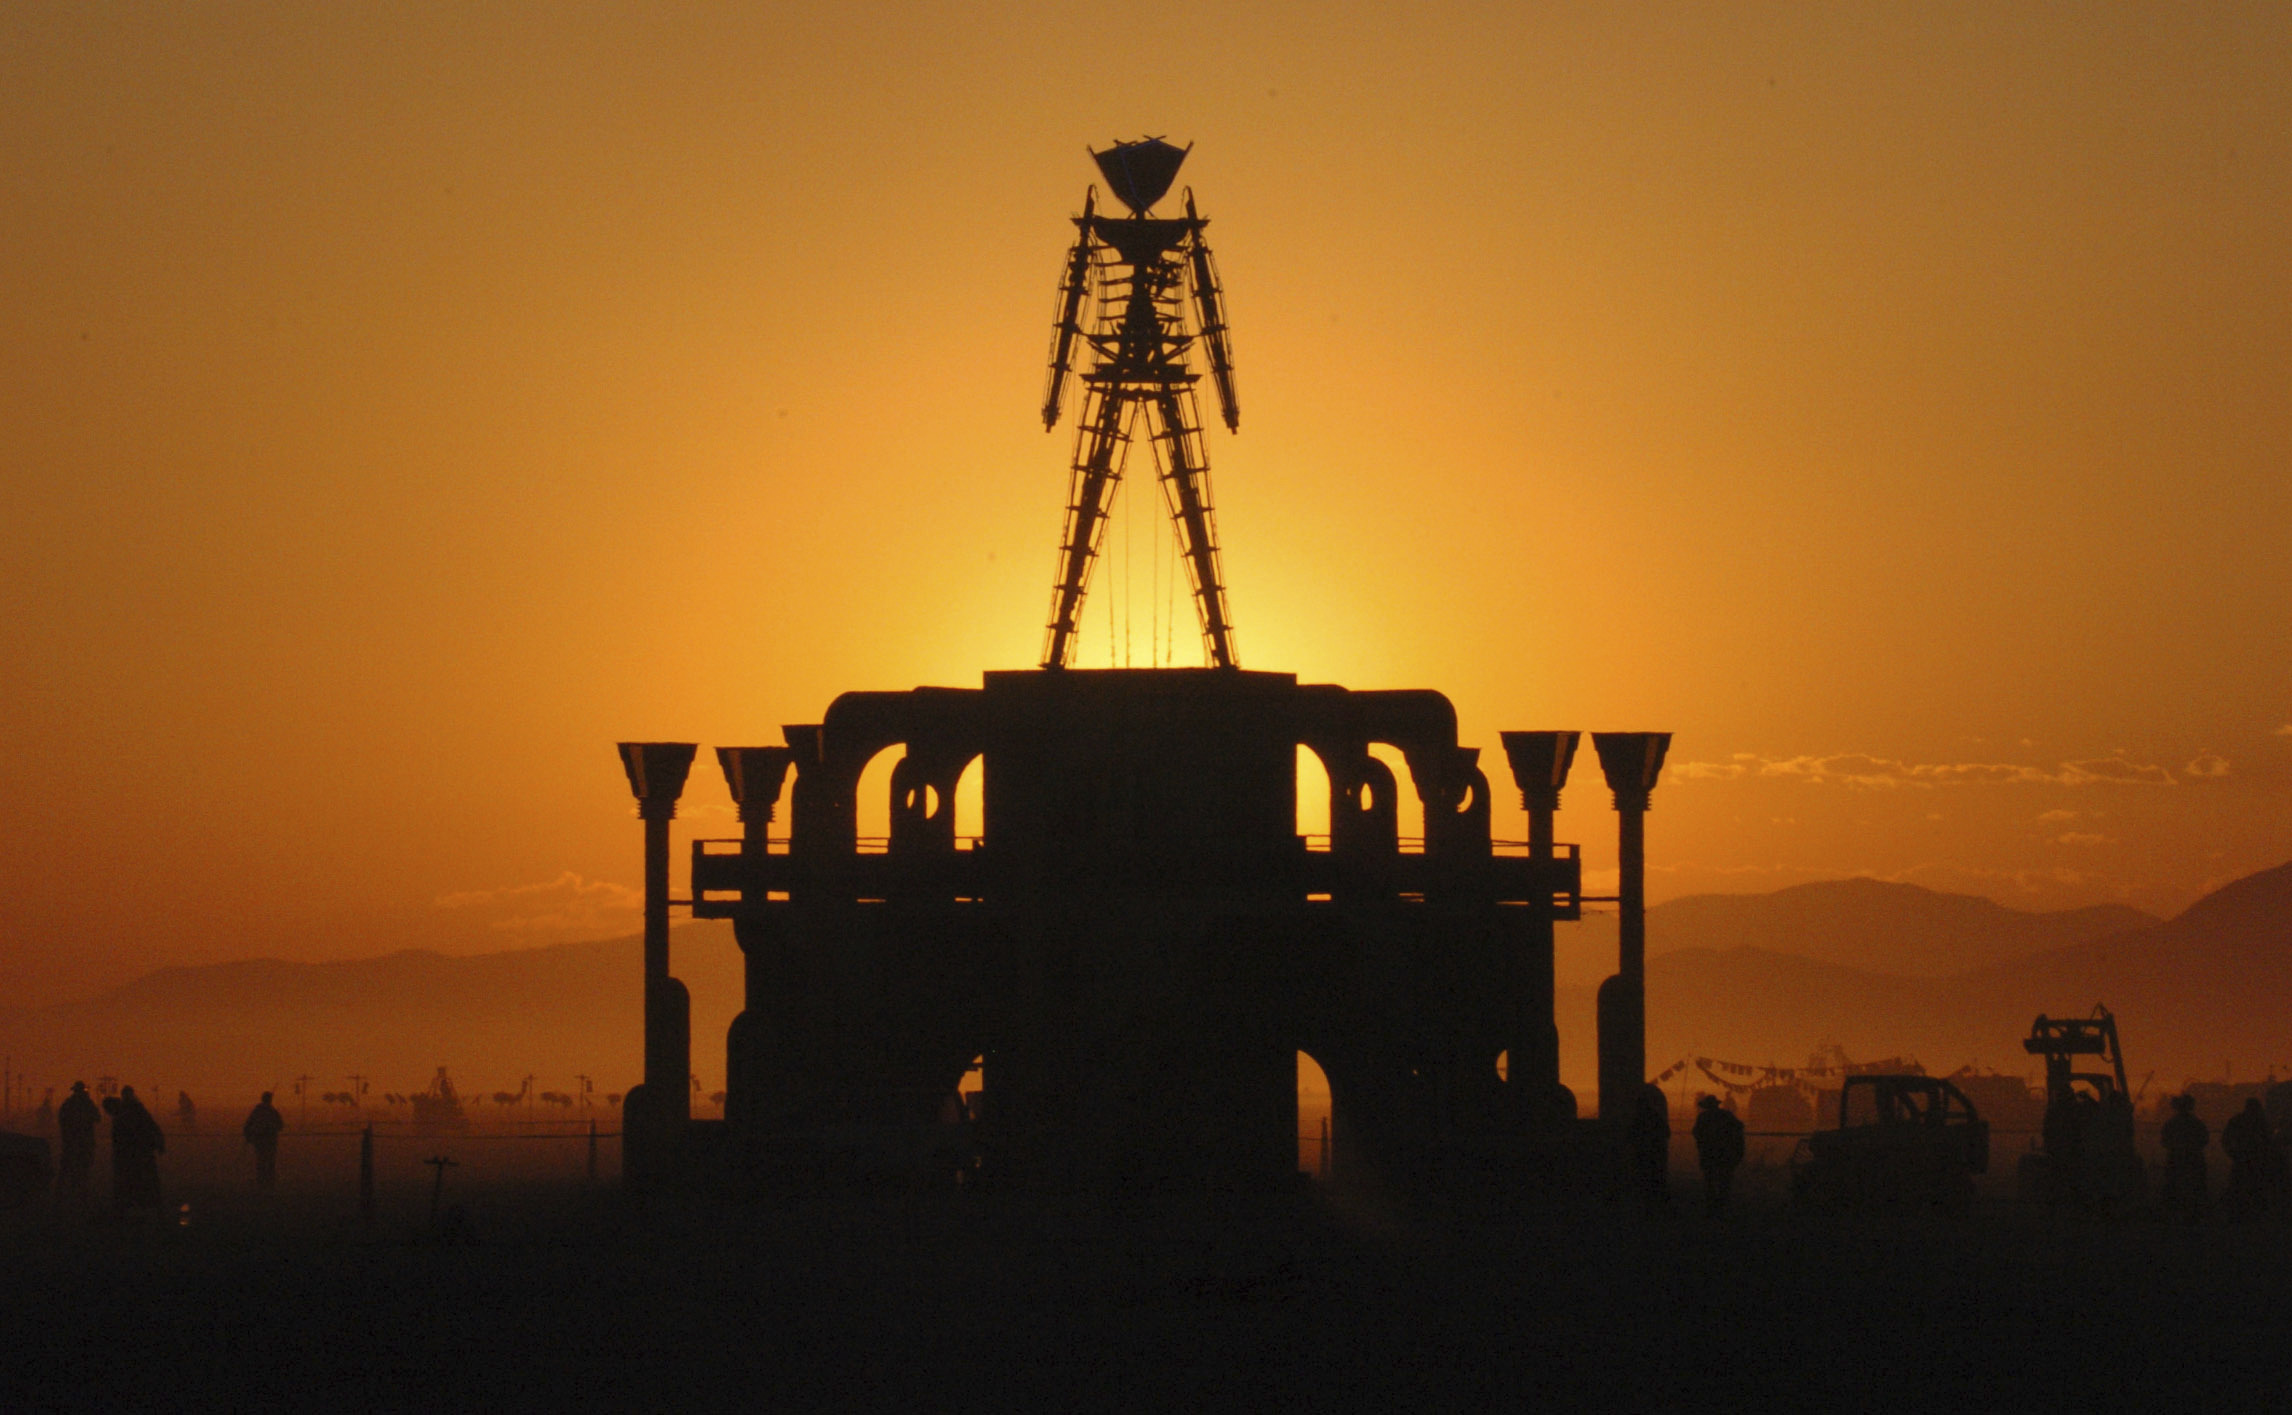 PHOTO: In this Sept. 2, 2006 file photo, The Man, a stick figured symbol of the Burning Man art festival, is silhouetted against a morning sunrise in Nevada's Black Rock Desert.